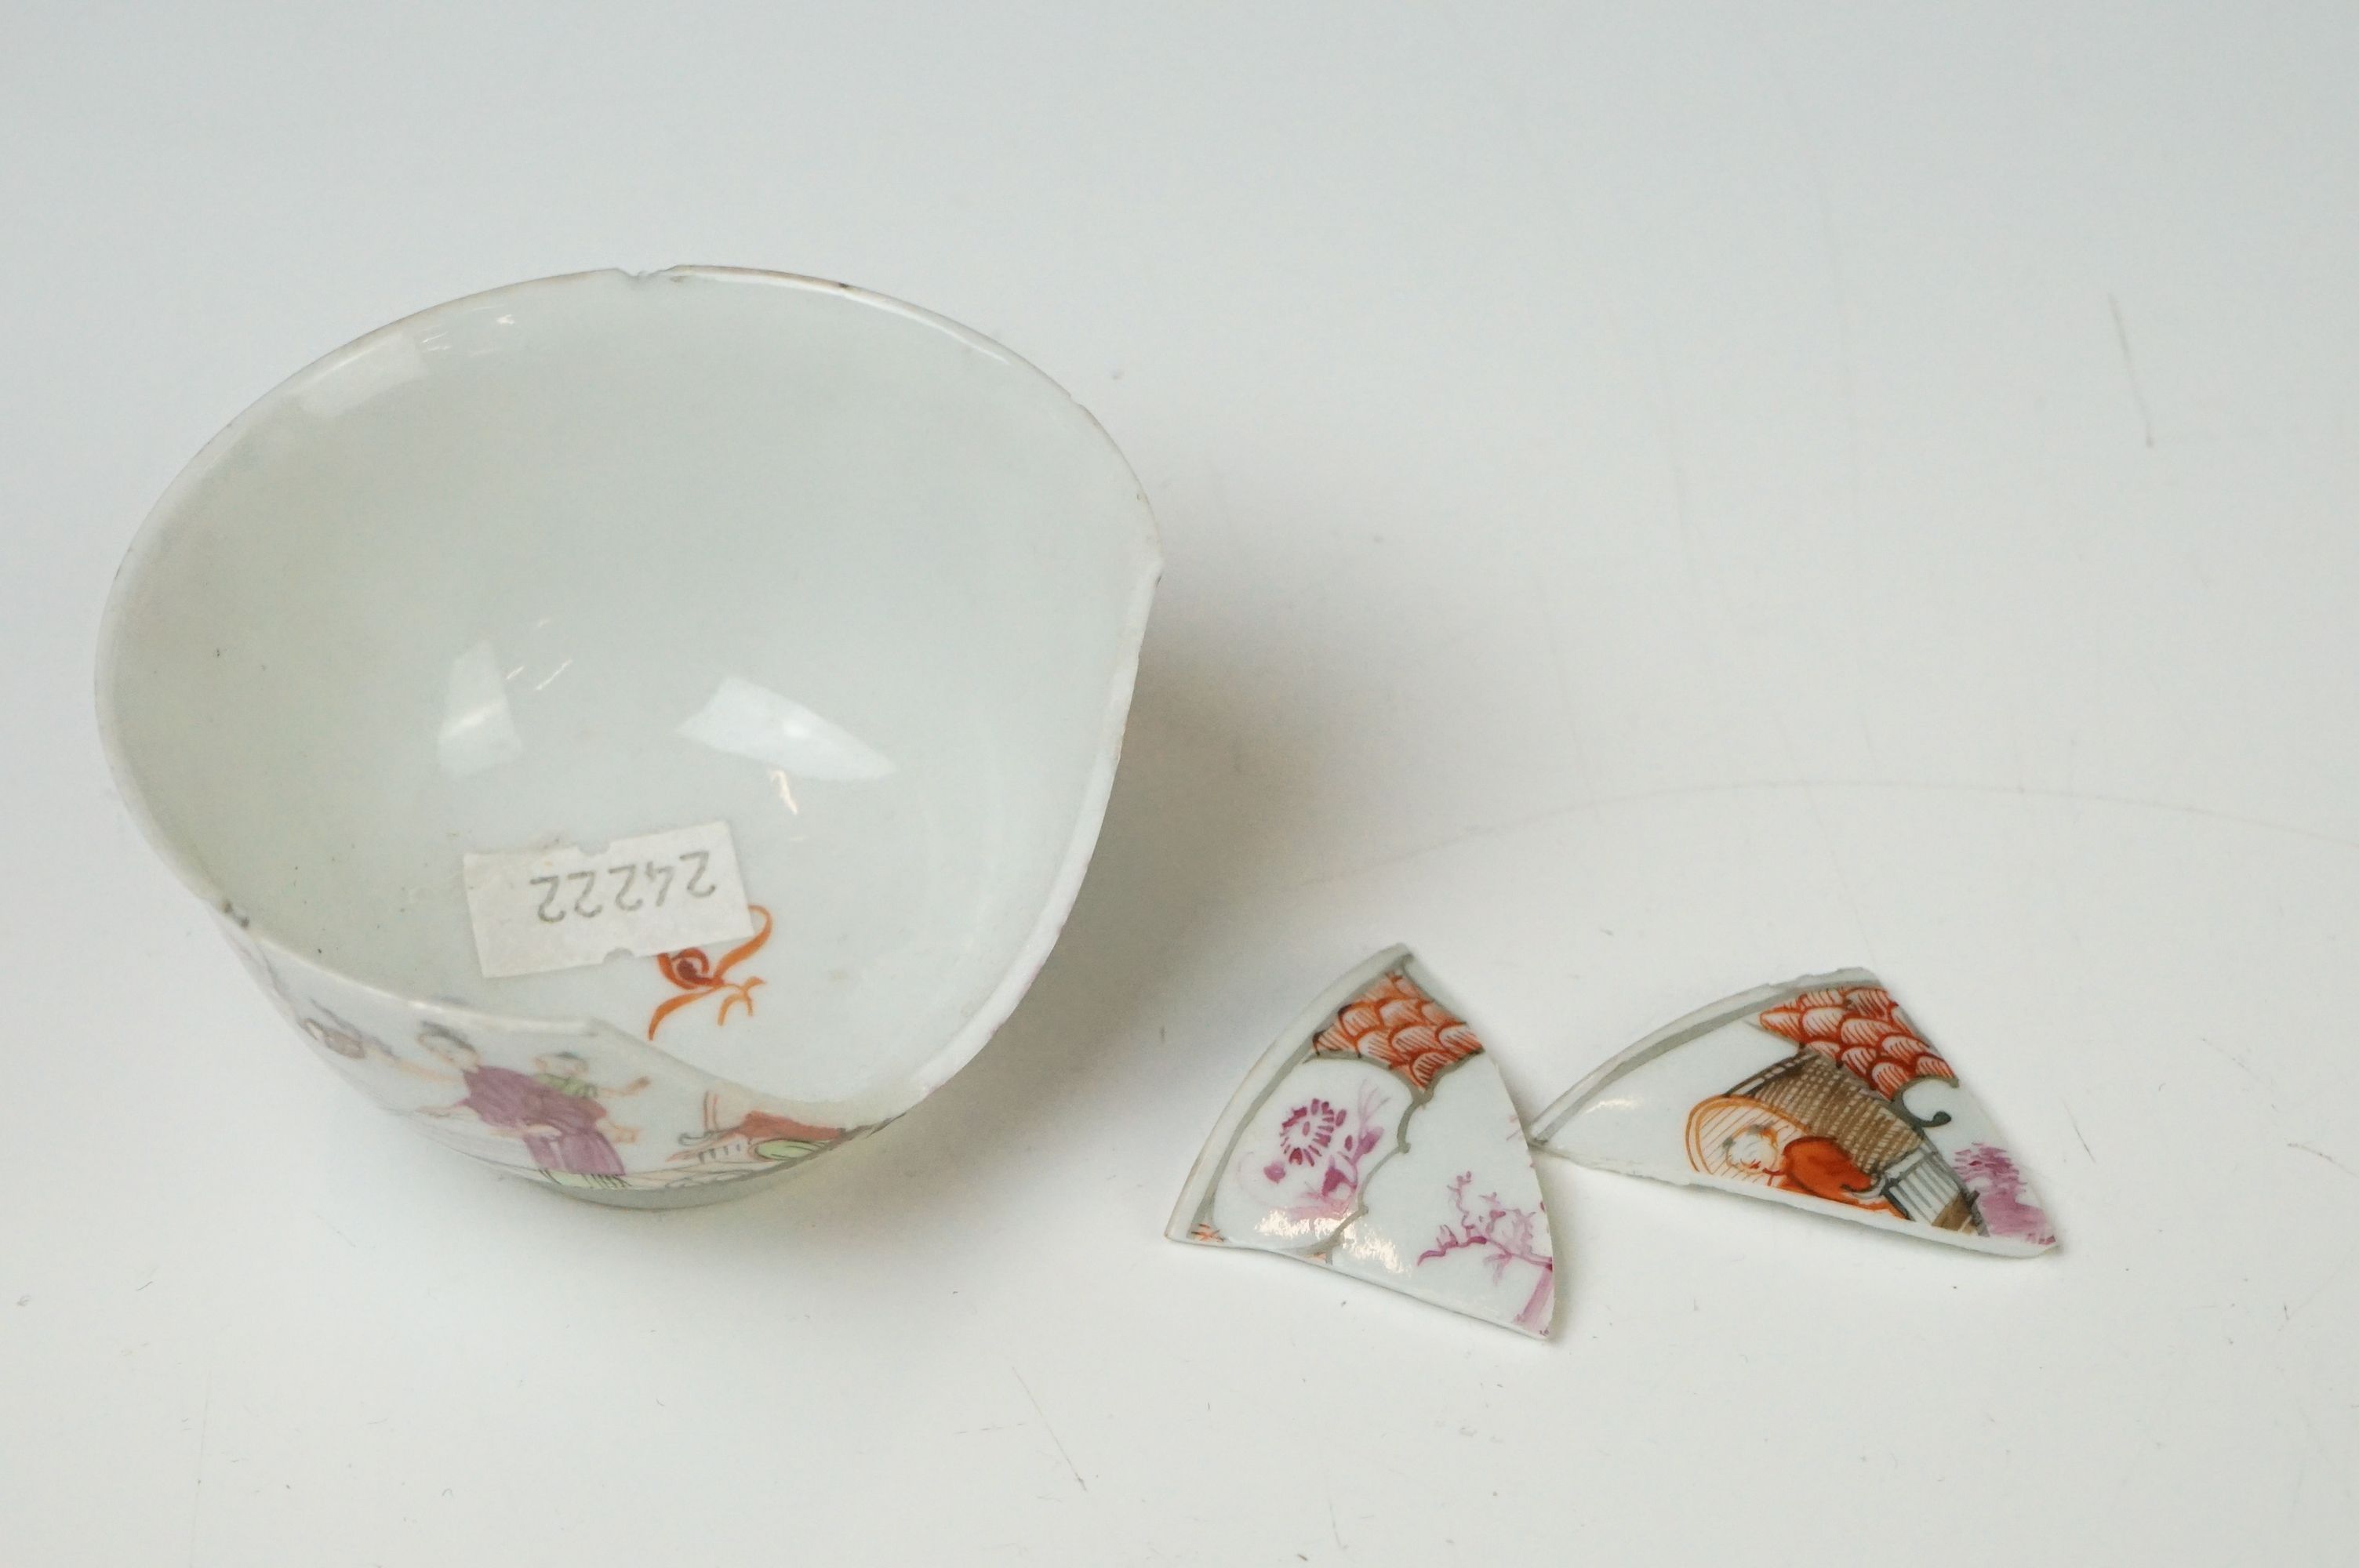 Collection of Chinese Tea Bowls, Cups and Saucers, 18th century onwards, mainly famille rose and - Image 23 of 28